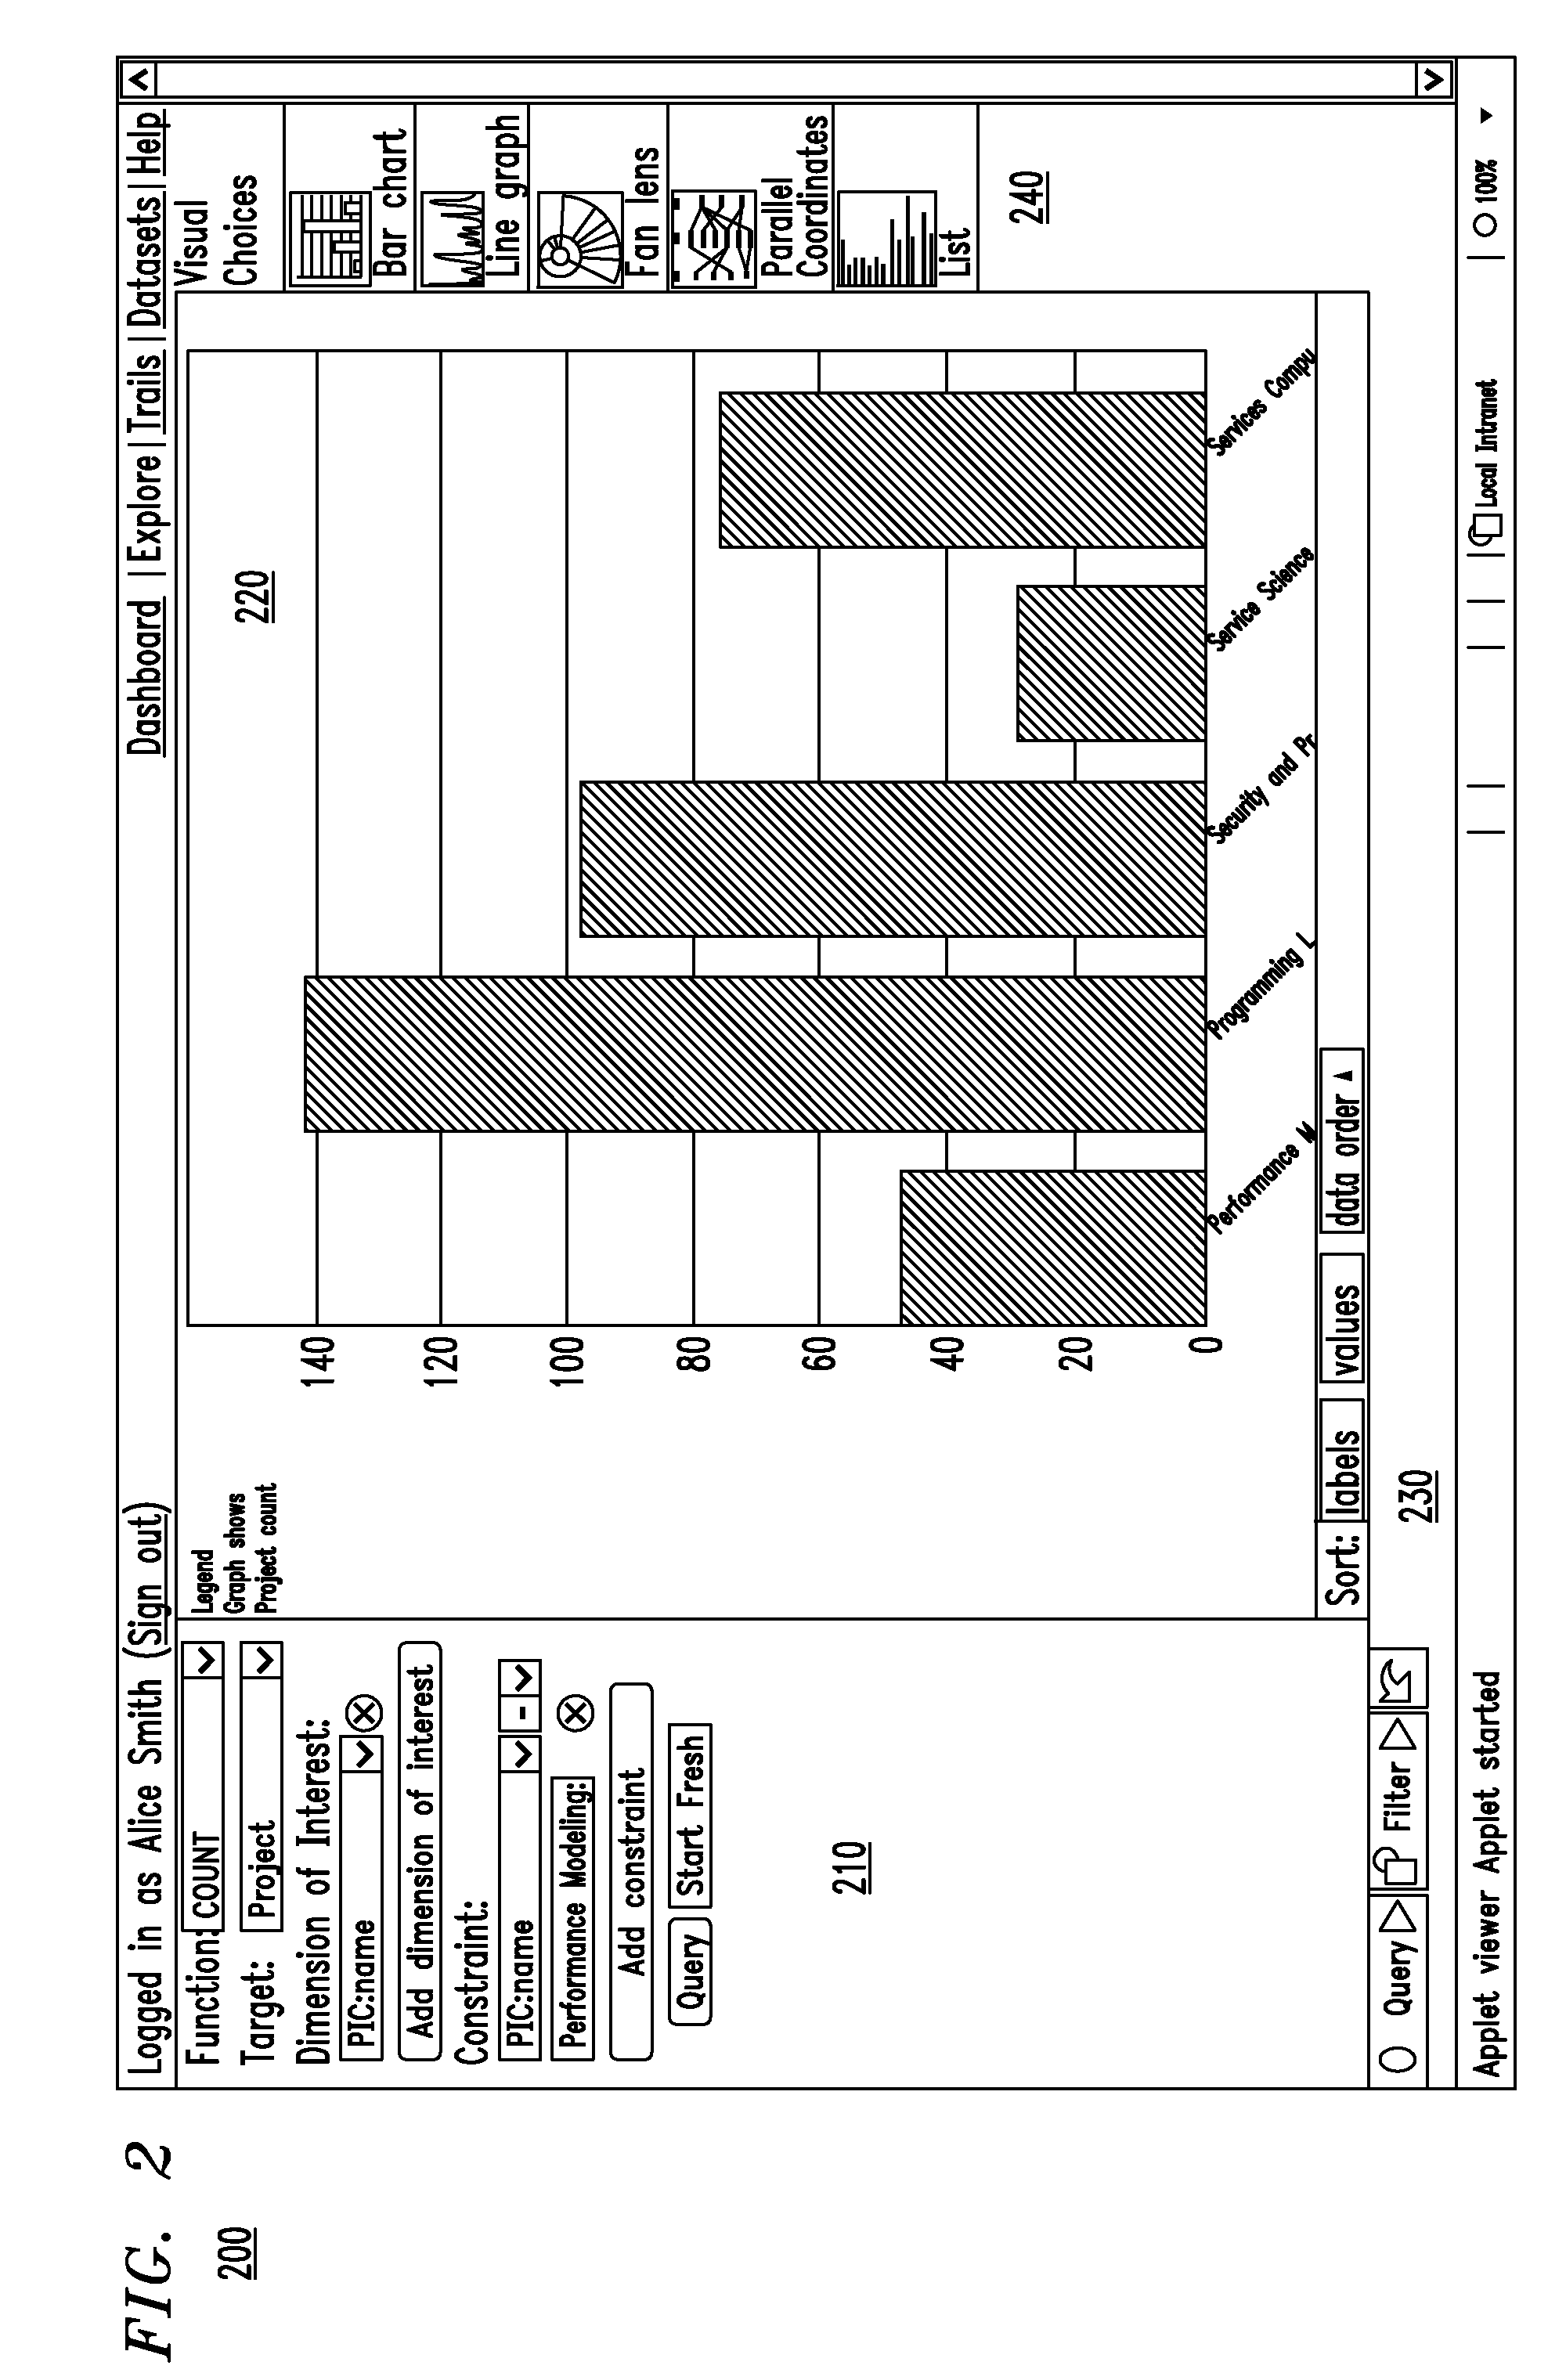 Methods and apparatus for intelligent exploratory visualization and analysis